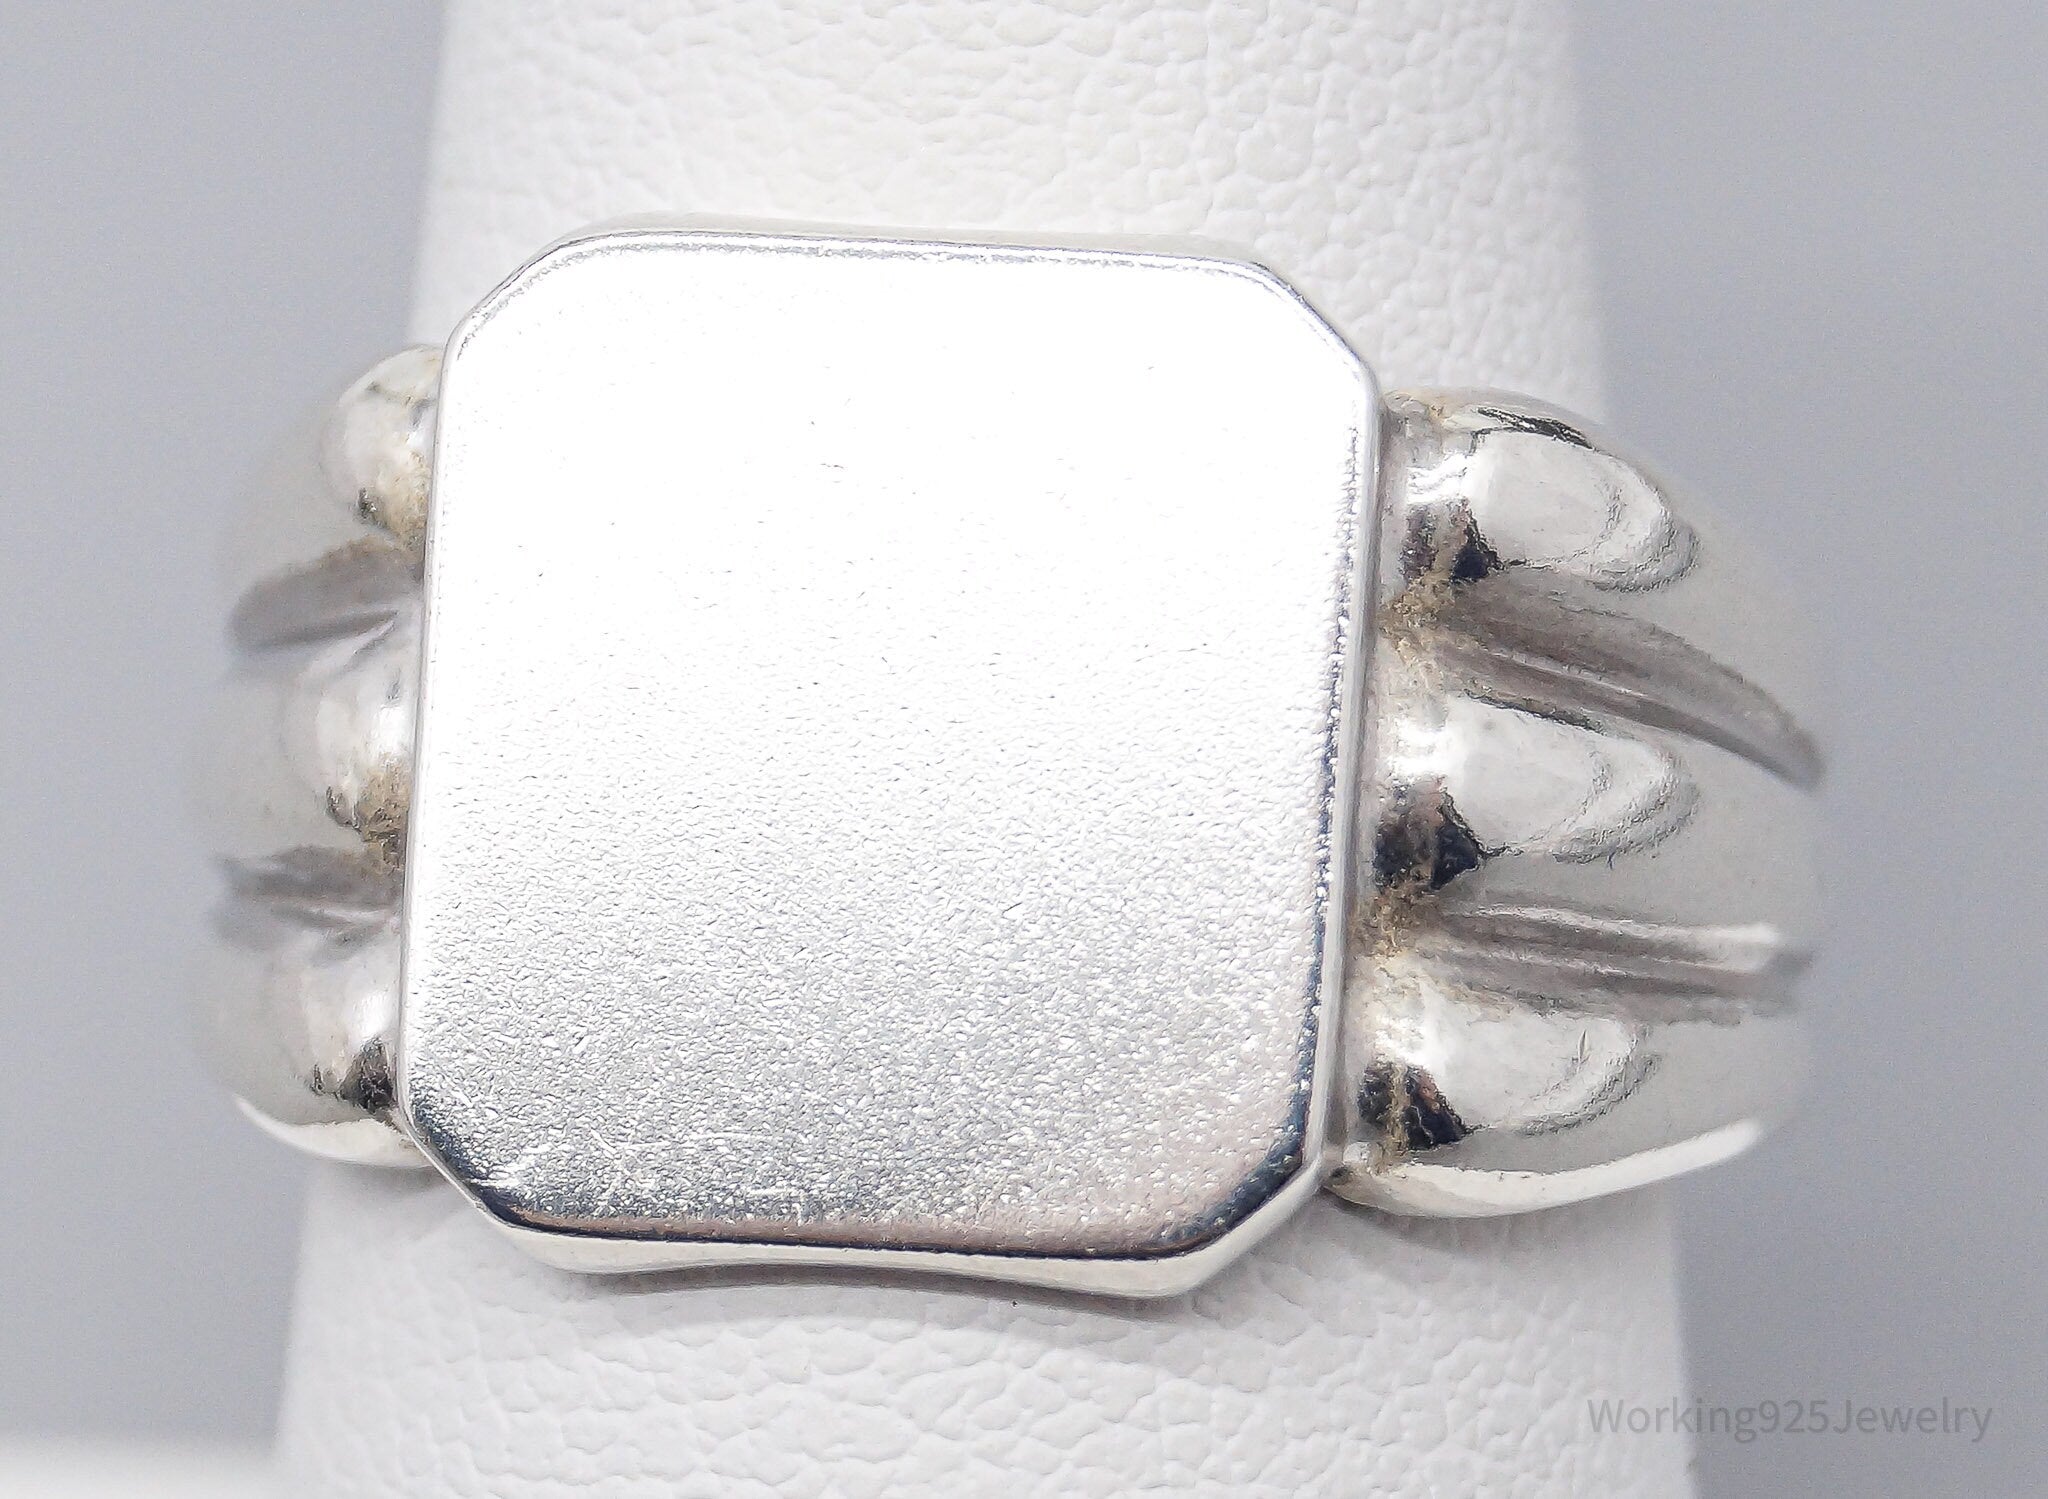 Antique Art Deco Clark & Coombs Sterling Silver Ring - Size 7.75